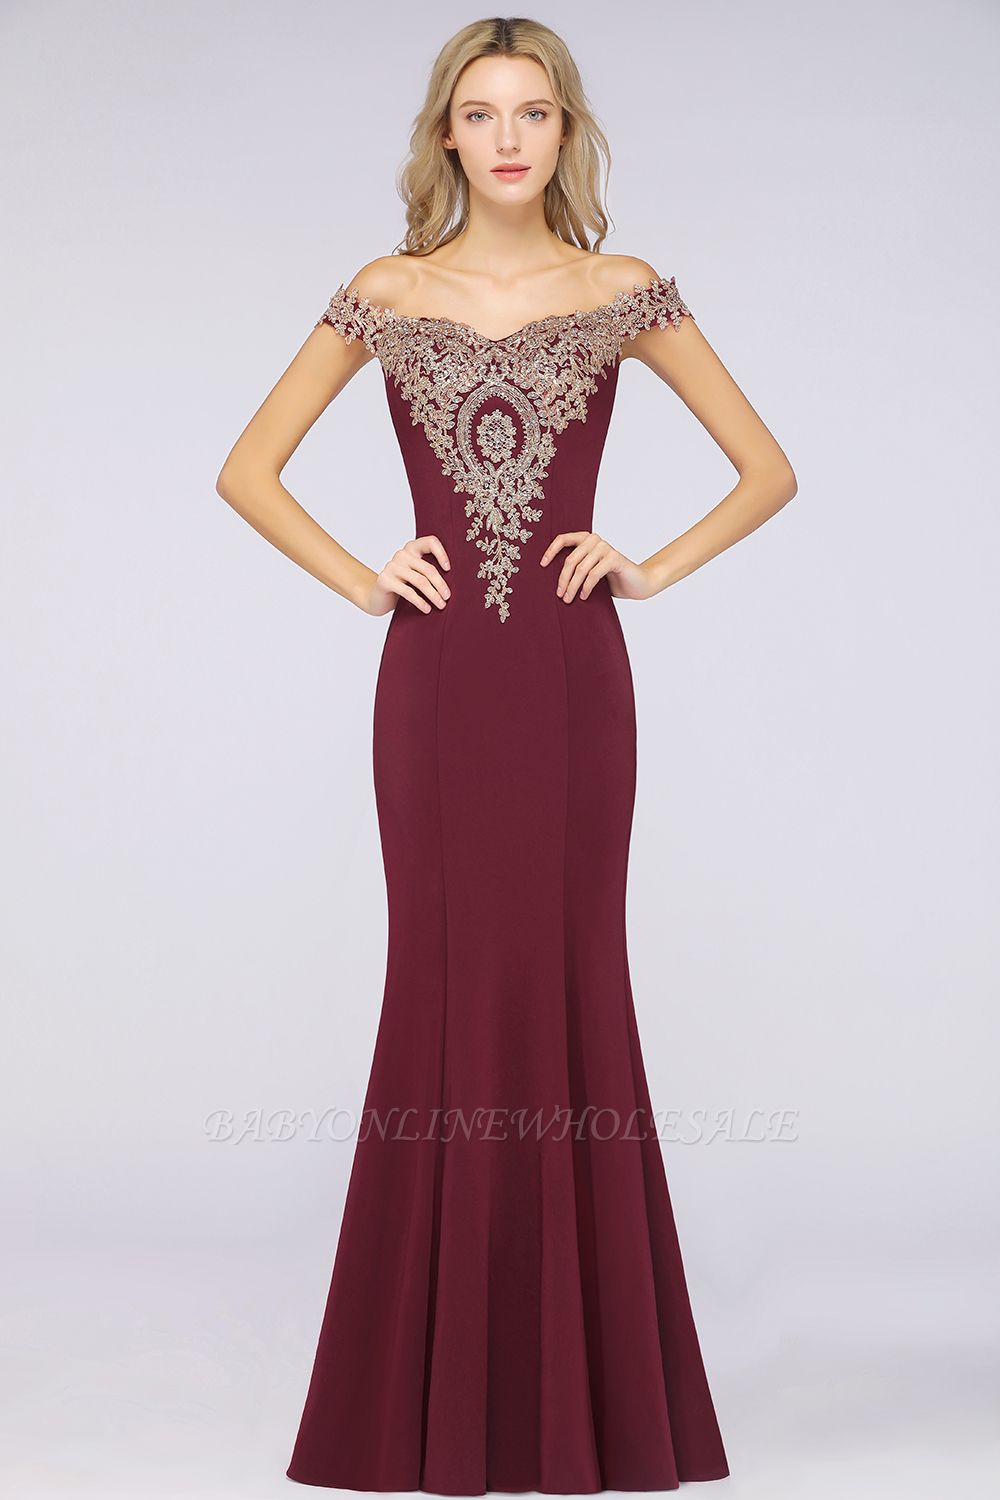 Charming Off The Shoulder Bridesmaid Dresses Mermaid Lace Appliques Sexy Evening Dress